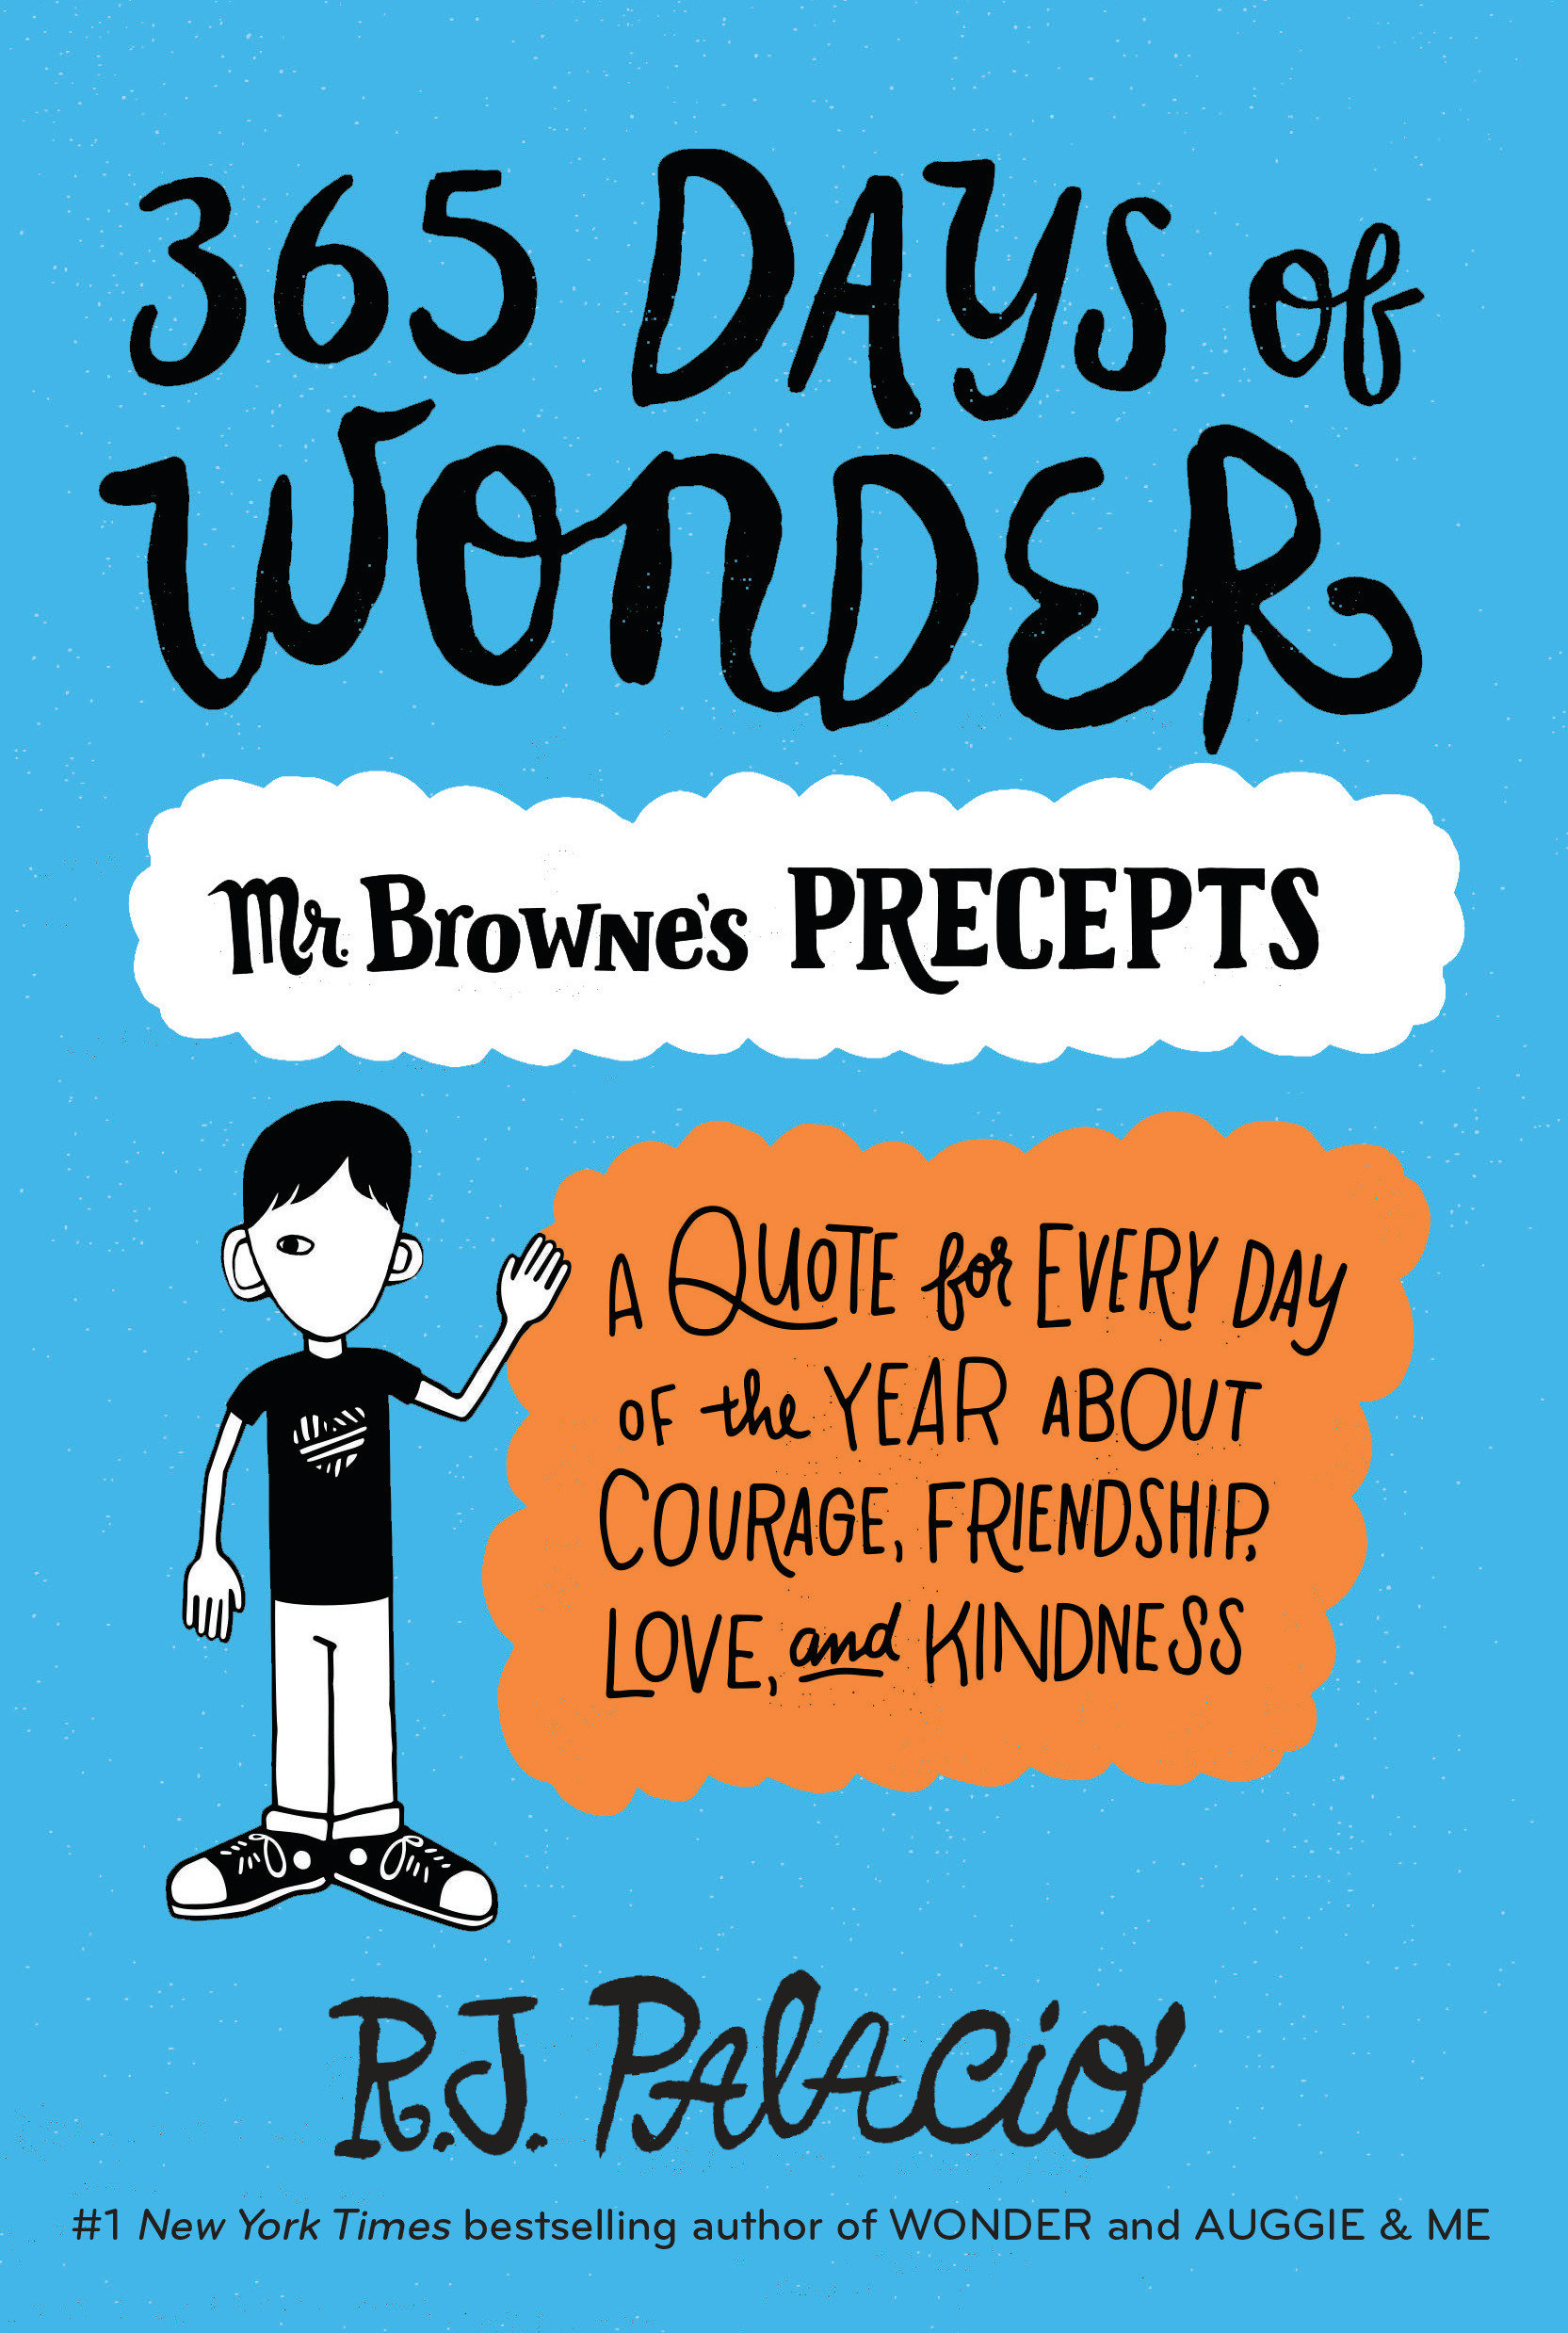 365 days of wonder: Mr. Browne's book of precepts cover image